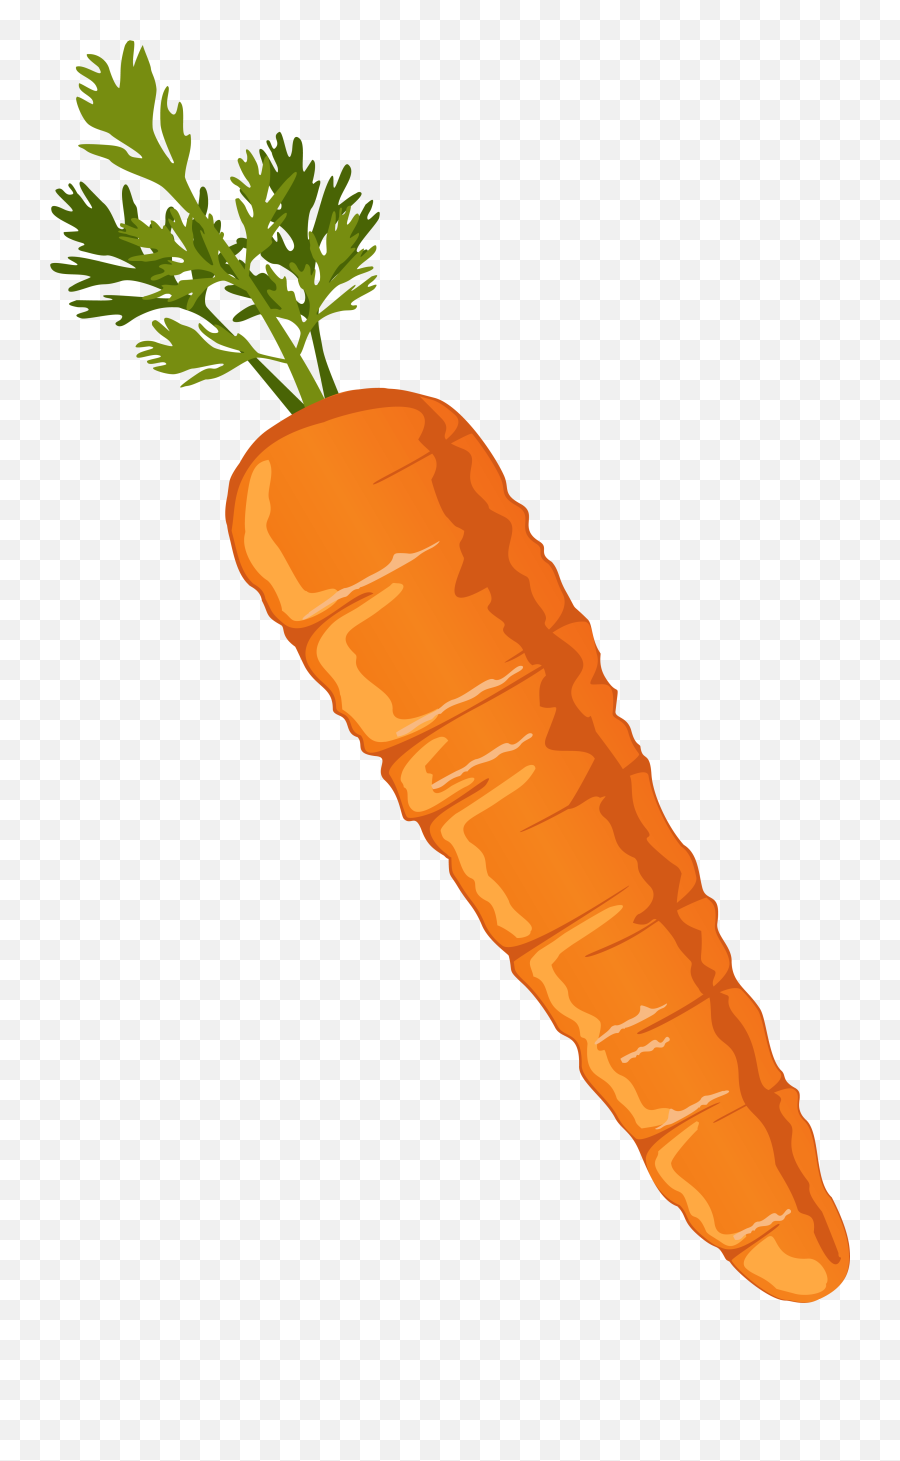 Carrot Clipart Image Gallery - Transparent Background Carrot Clip Art Emoji,Carrot Emoji